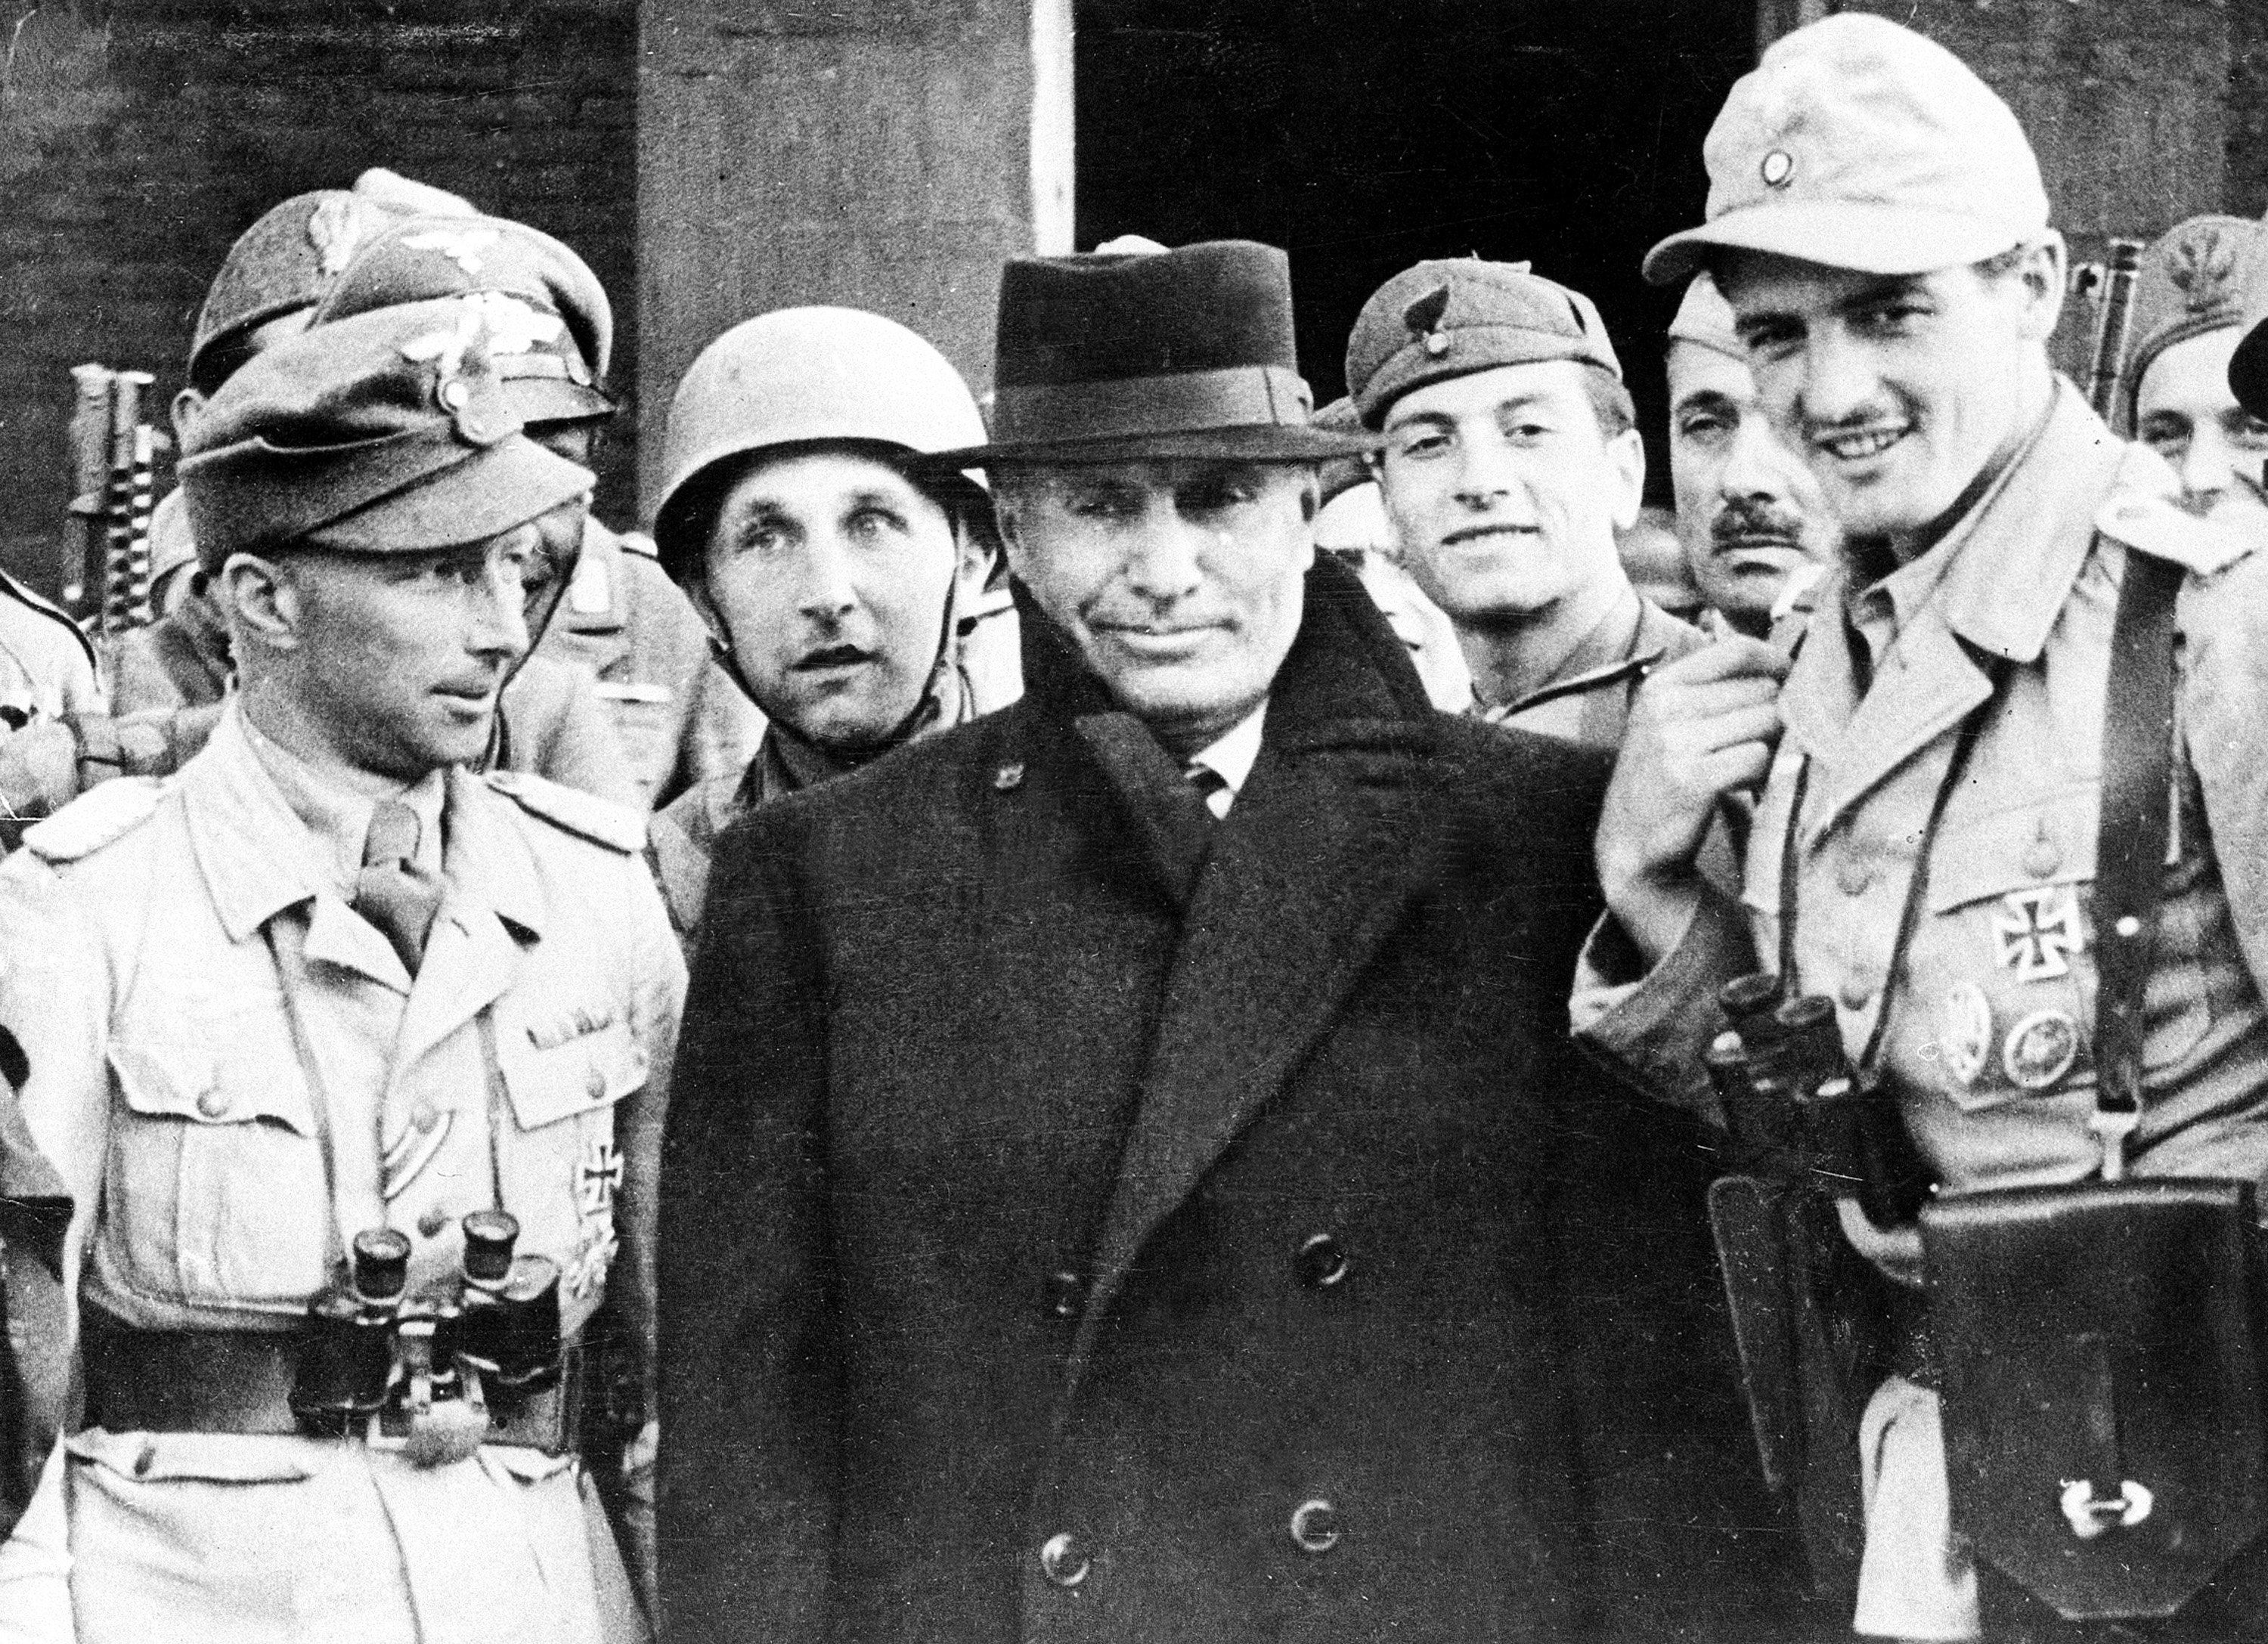 During World War II, Benito Mussolini (C), surrounded by German paratroopers who rescued him from imprisonment, is in front of a hotel in the Gran Sasso Mountain area, Italy, September 1943. (AP Photo)